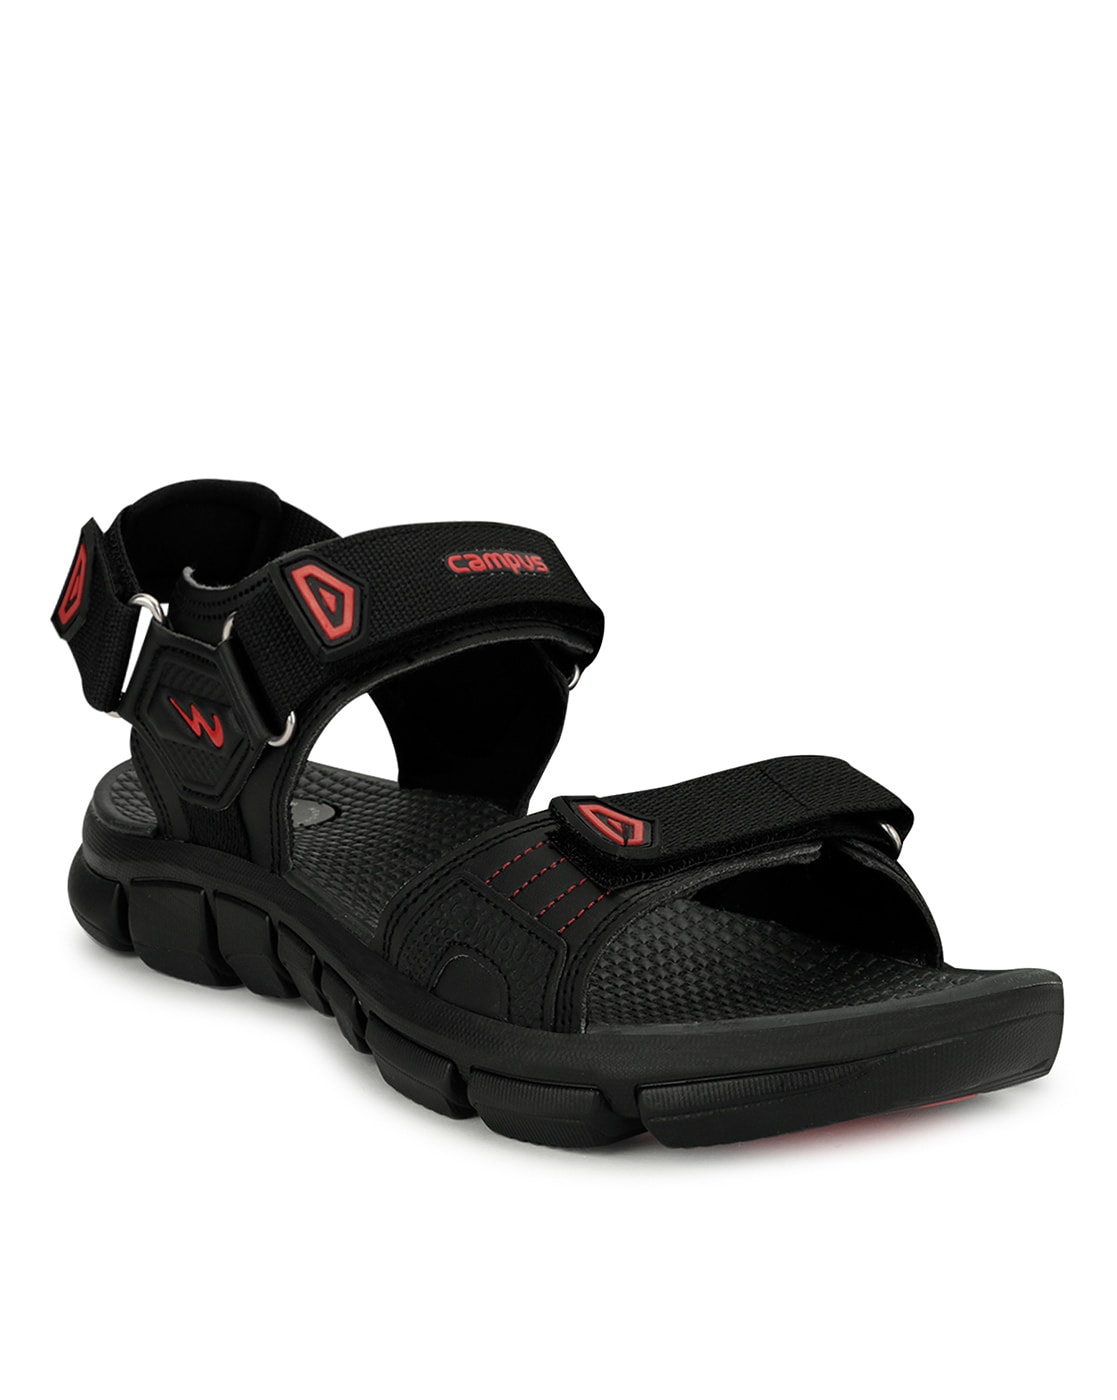 CAMPUS Sd-014 Sandals in Delhi at best price by Basant Shoe Co - Justdial